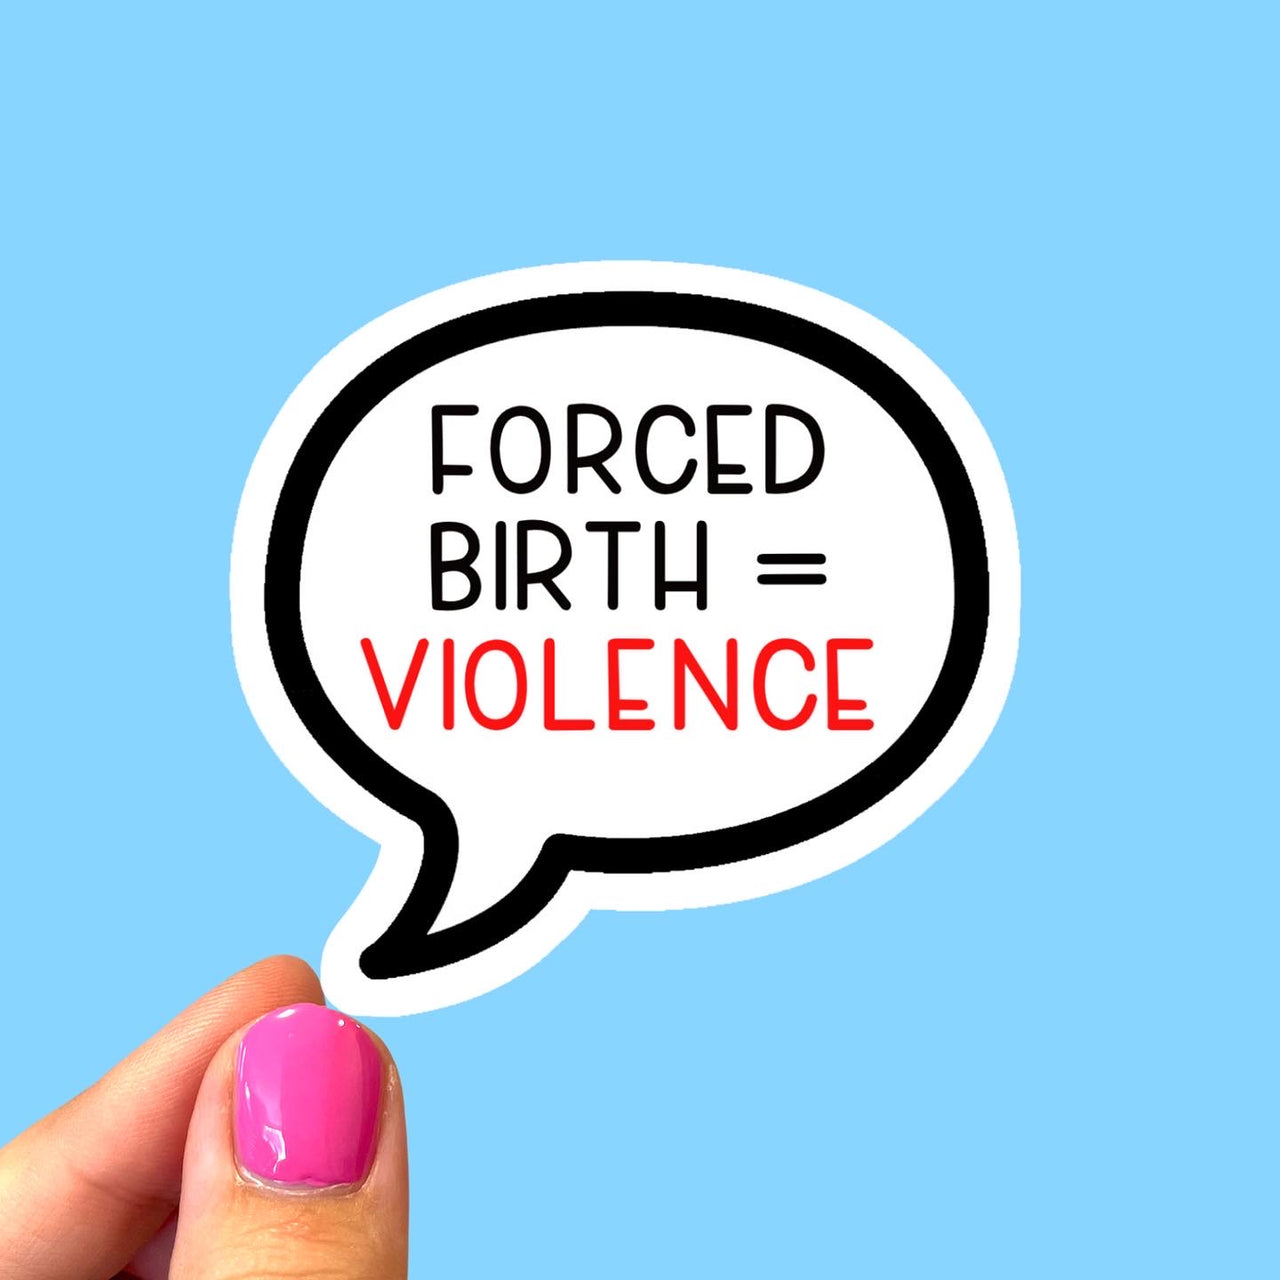 Forced birth is violence